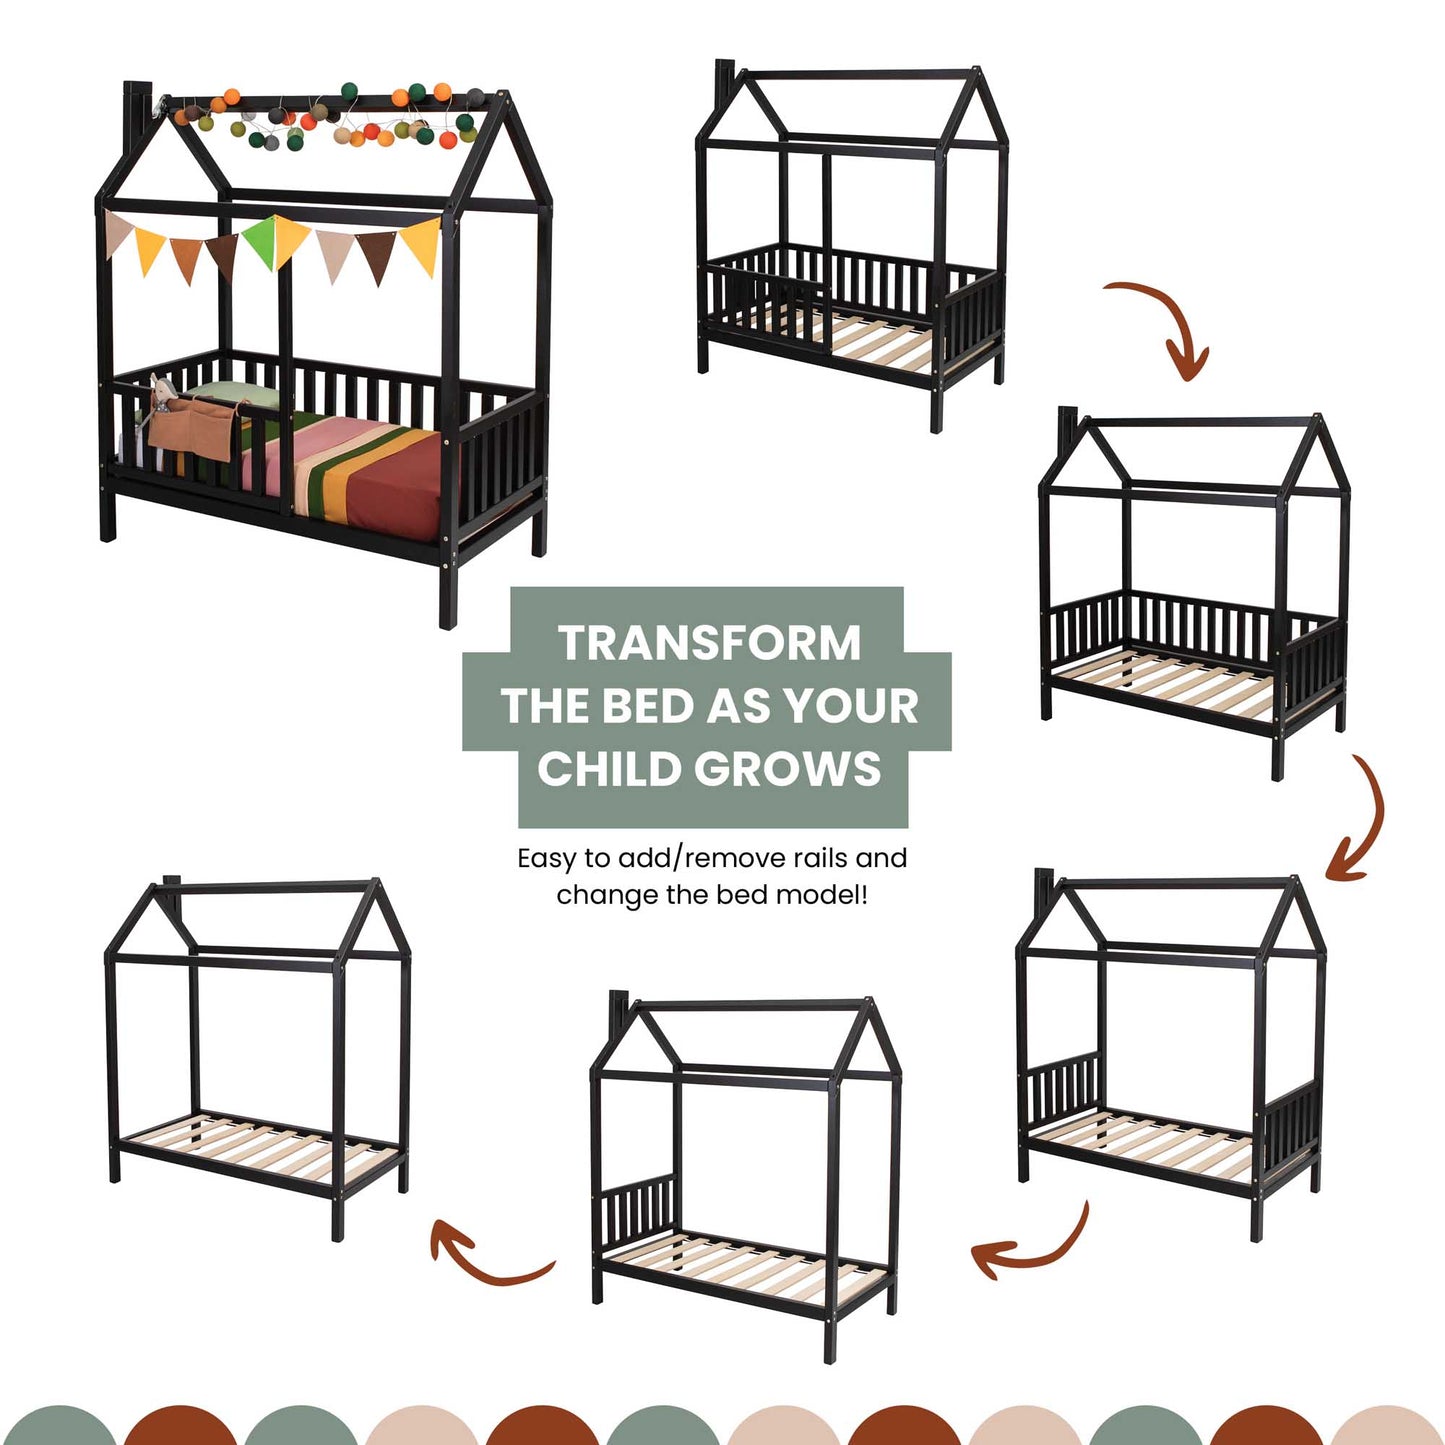 Create a Kids' house bed on legs with a fence that adapts to your child's growth.